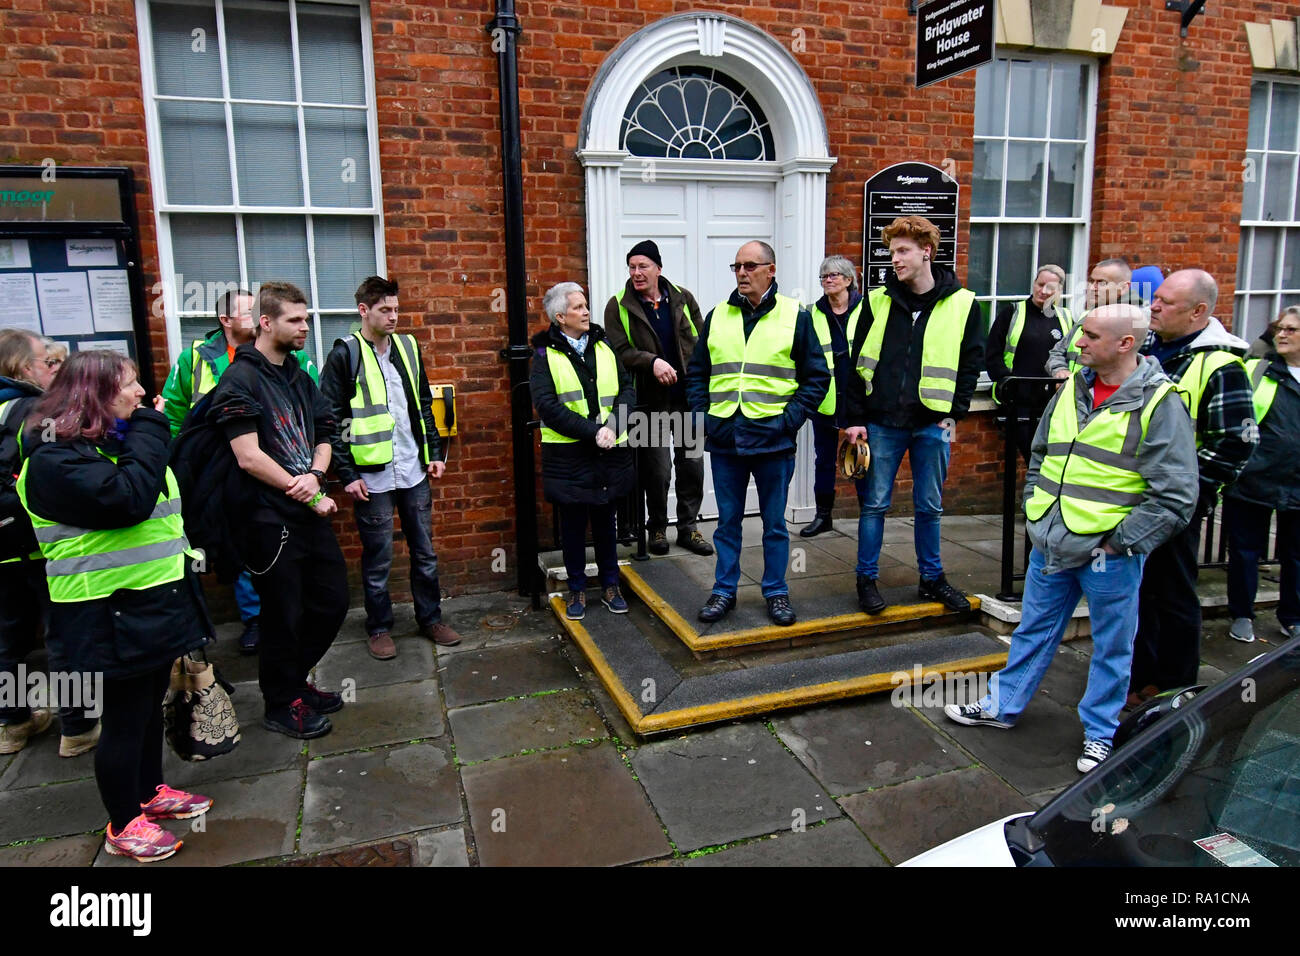 Bridgewater, Somerset, UK. 30th December 2018. UK in Bridgewater Yellow Vest protesters take to the streets and march from Bridgewater Docks to Sedgemoor District Council office Bridgewater House in King's Square, protests over local Councillors High Expenses and how things are run. Credit: Robert Timoney/Alamy Live News Stock Photo